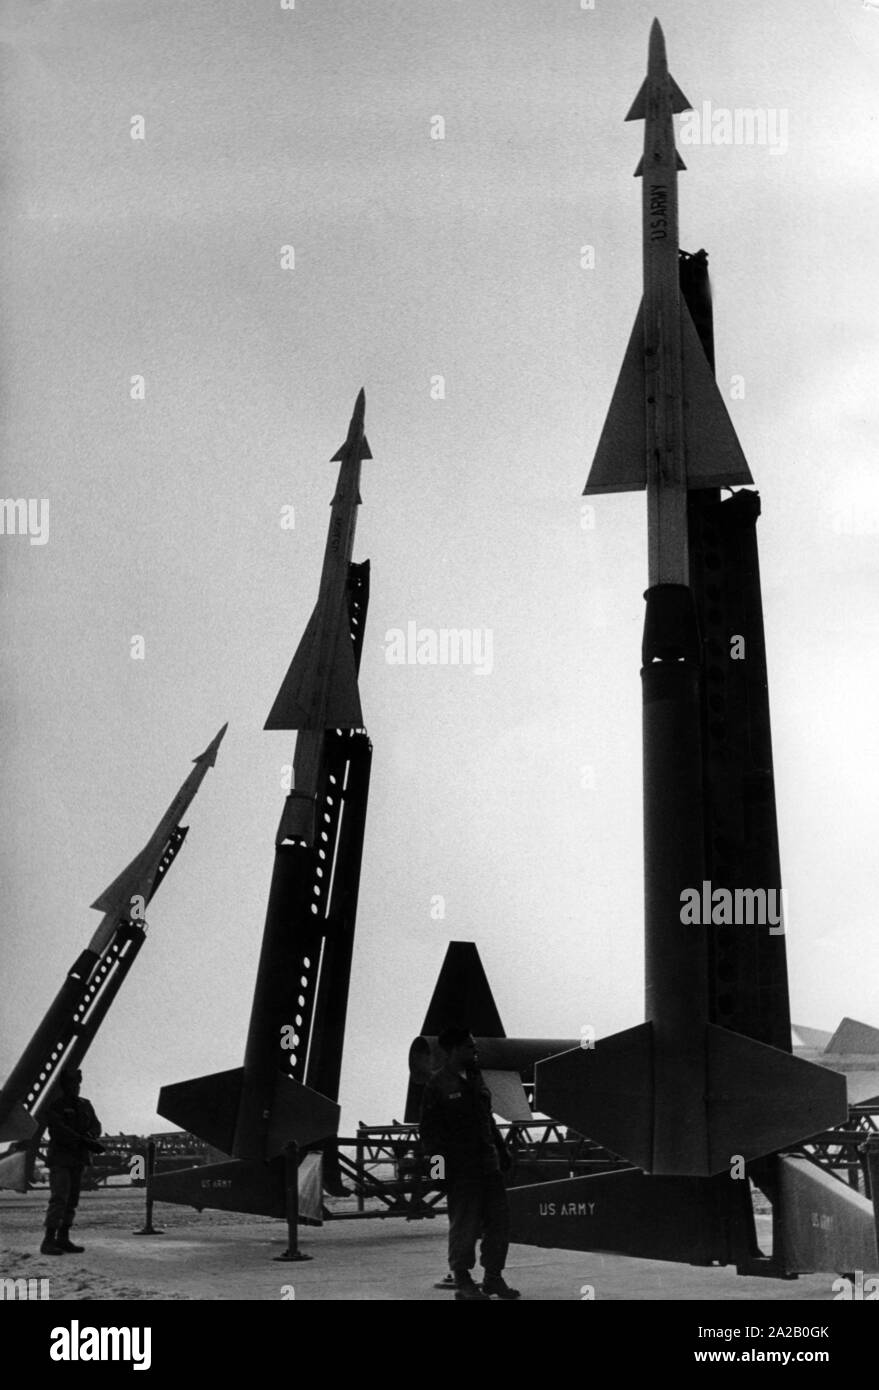 The picture shows US soldiers next to rocket systems of the type NIKE Ajax, presumably in the late 1950s. These ground-to-air missiles were designed to defend against enemy bombers. The picture was taken before the former Ludendorff Barracks in Kornwestheim near Stuttgart. Stock Photo